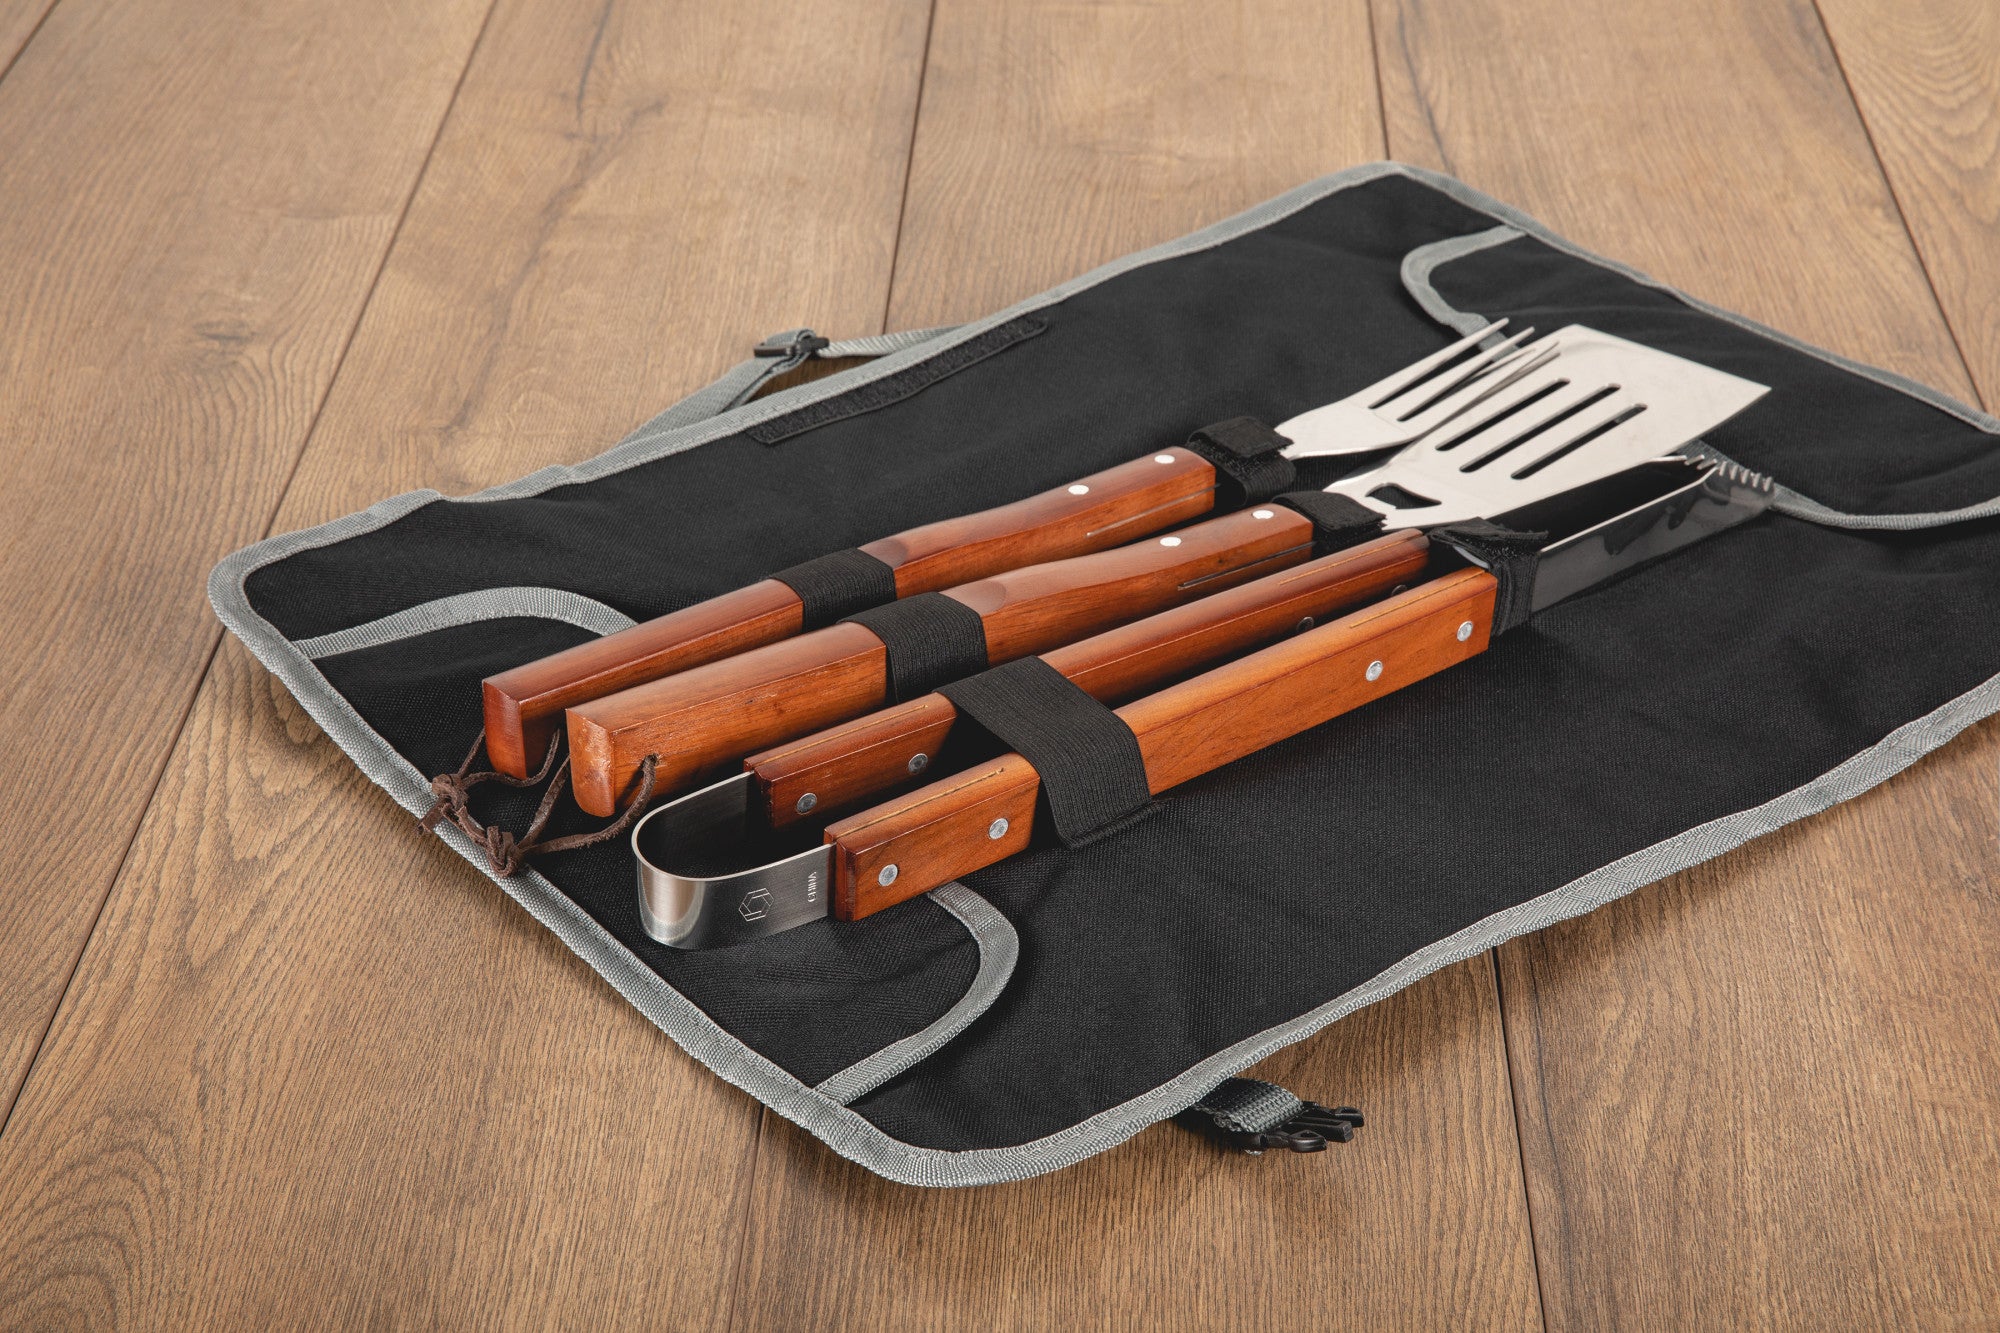 Seattle Mariners - 3-Piece BBQ Tote & Grill Set